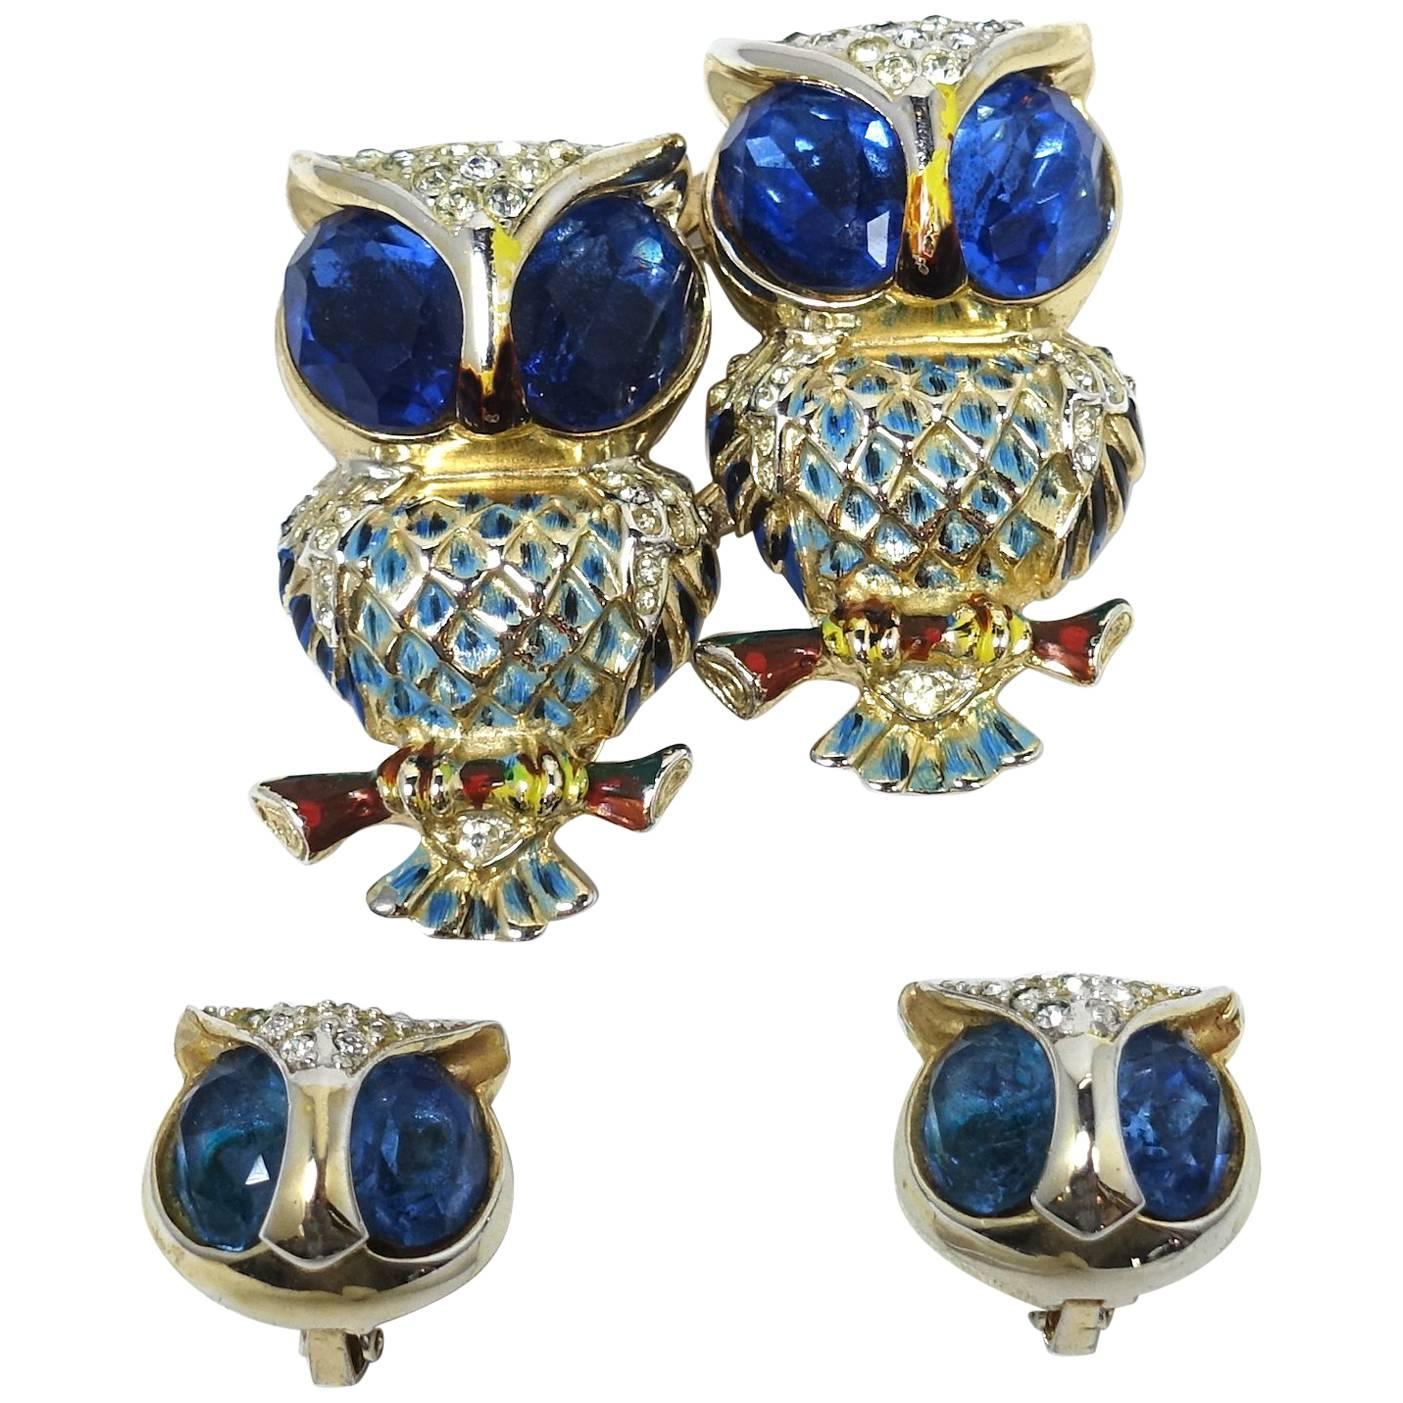 FAMOUS Vintage Signed Coro Craft Owl Duette Brooch & Earrings Set For Sale